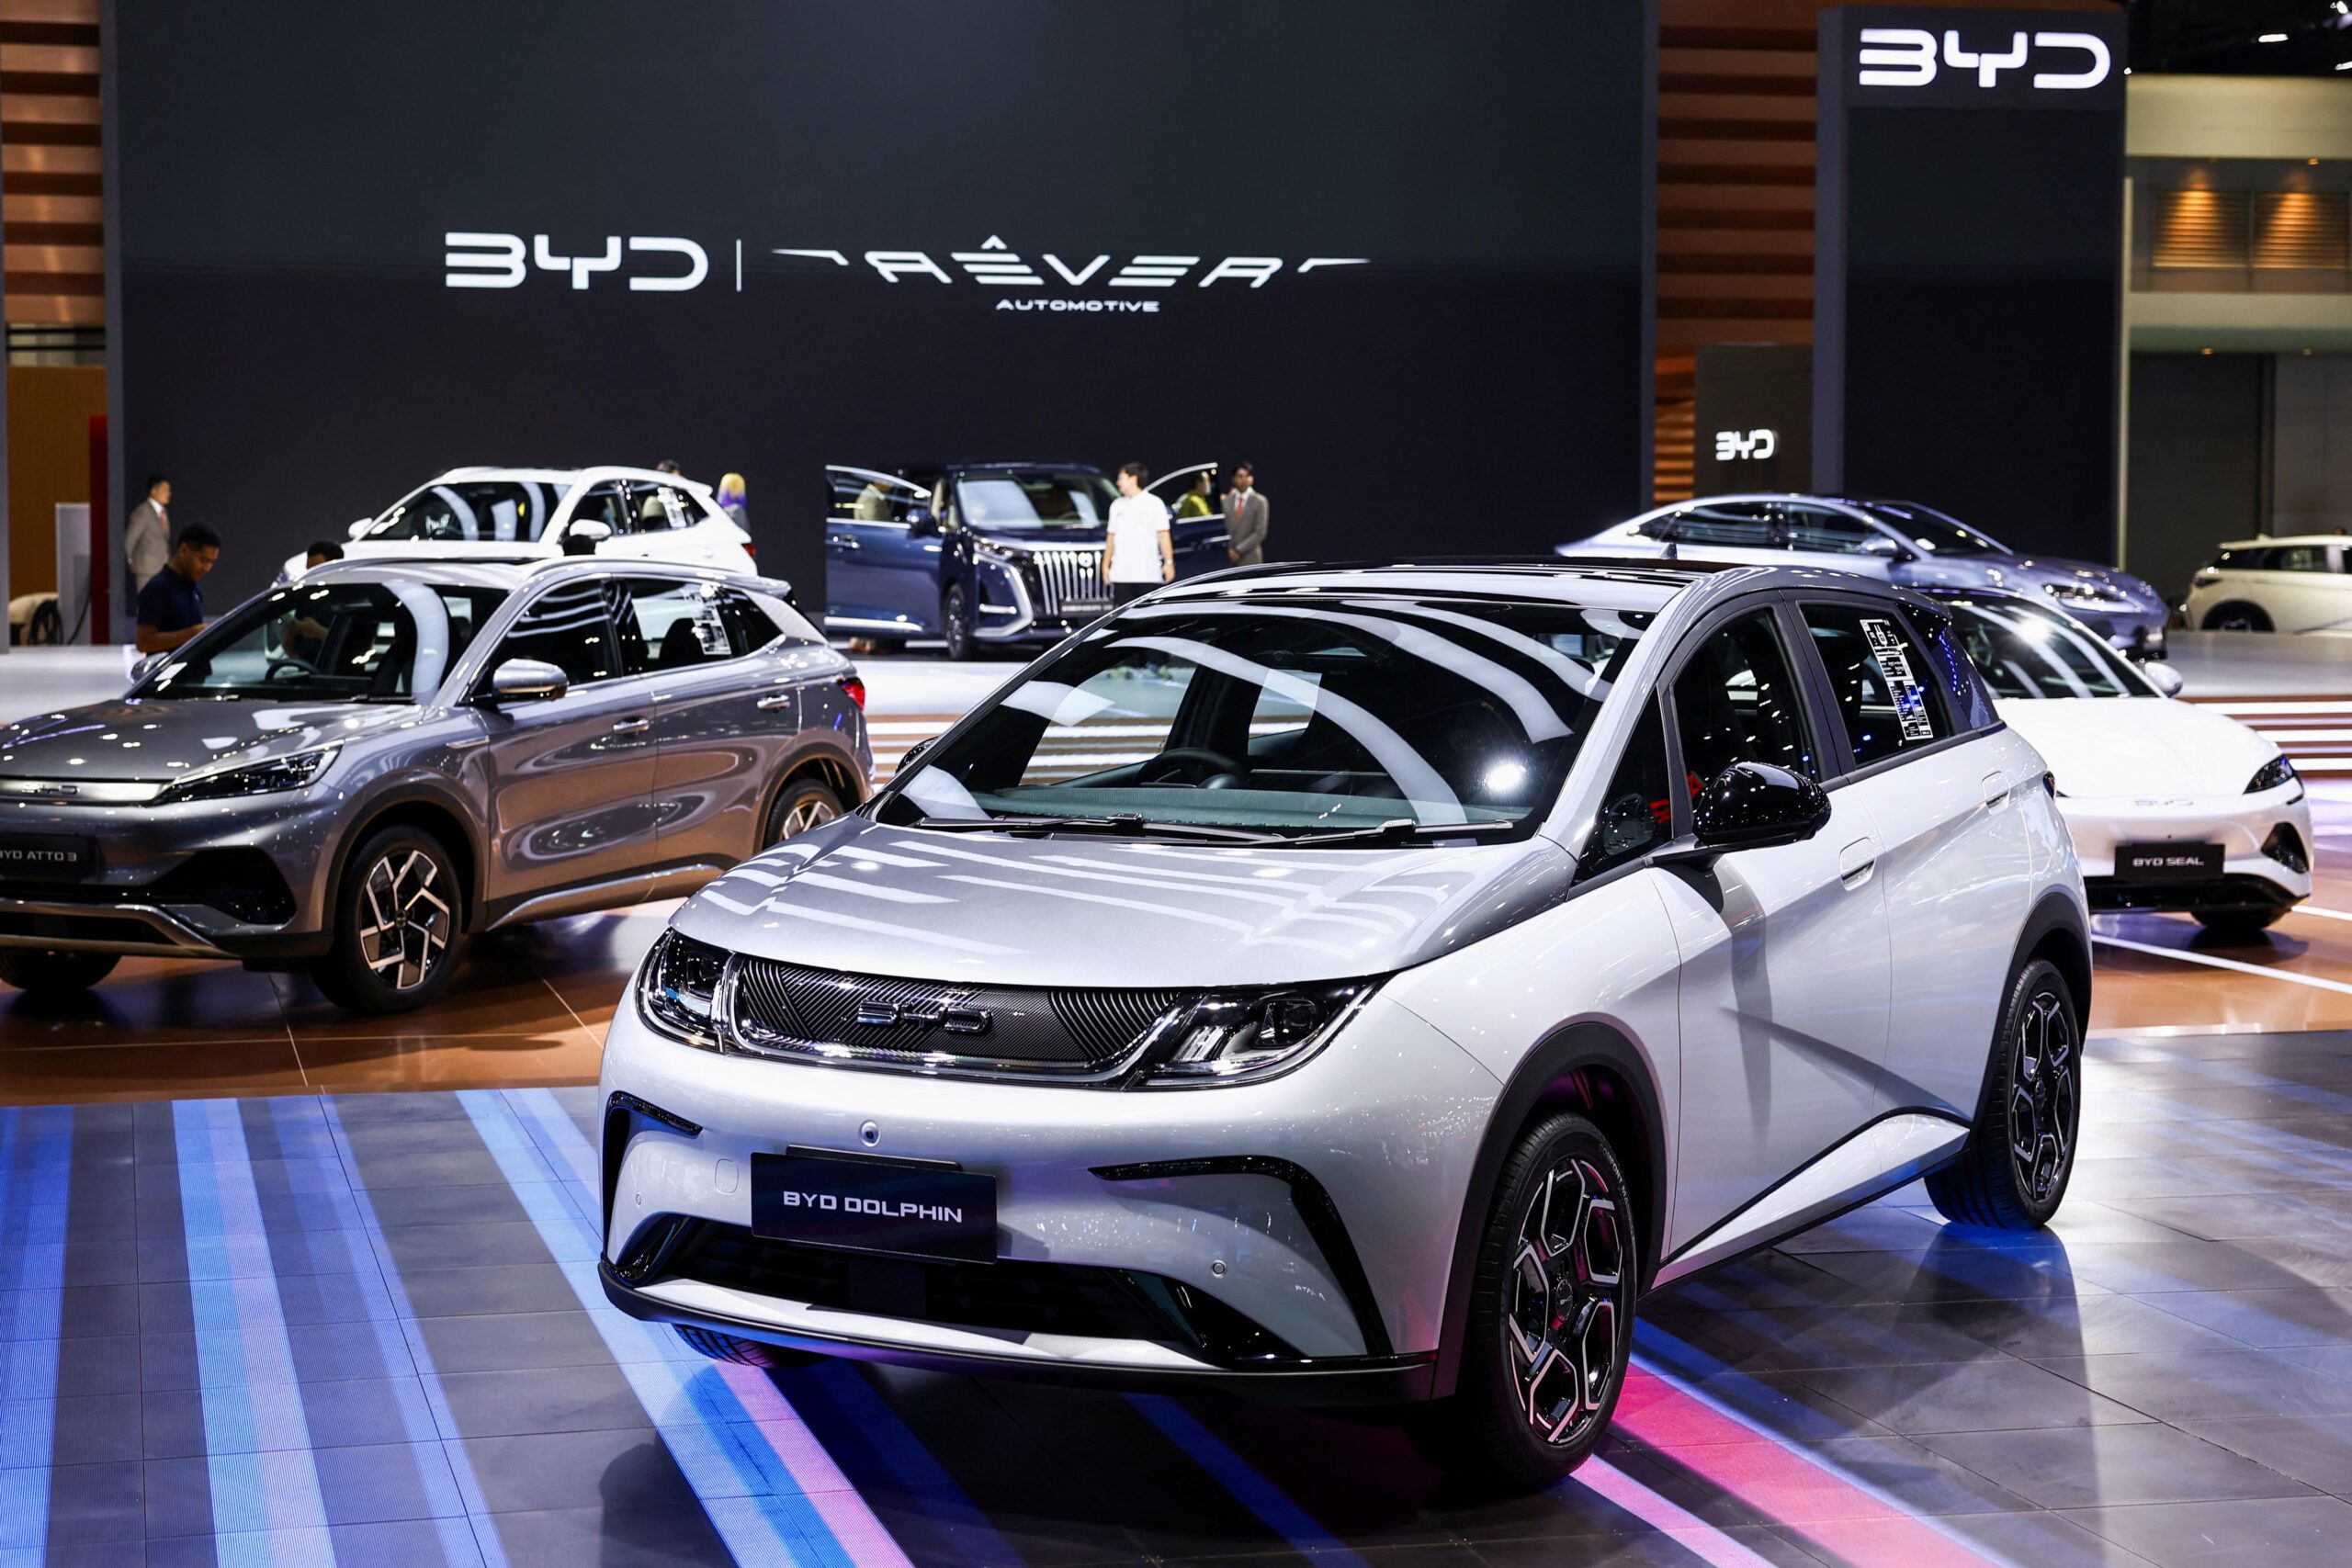 Chinese EV giant BYD's quarterly earnings skid on savage price war